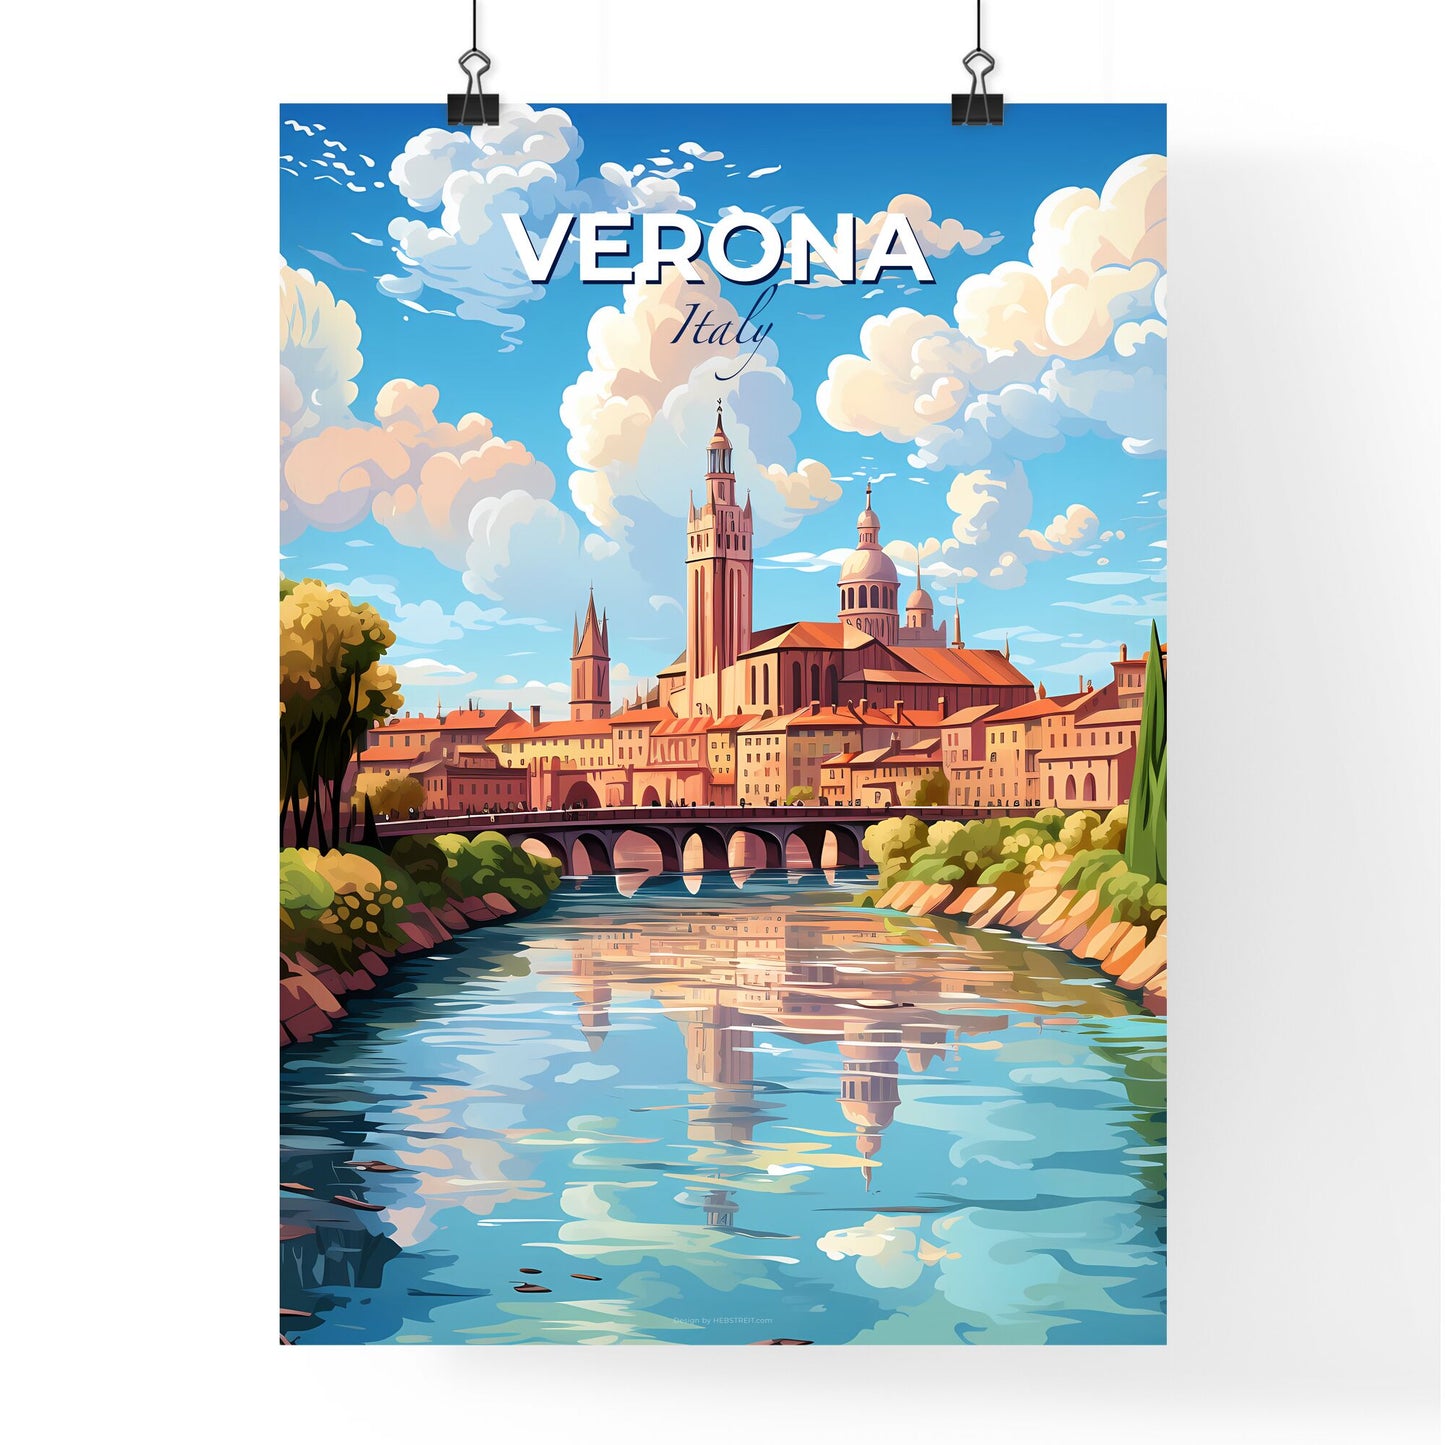 Verona Italy Skyline - A River With A Bridge And A City In The Background - Customizable Travel Gift Default Title